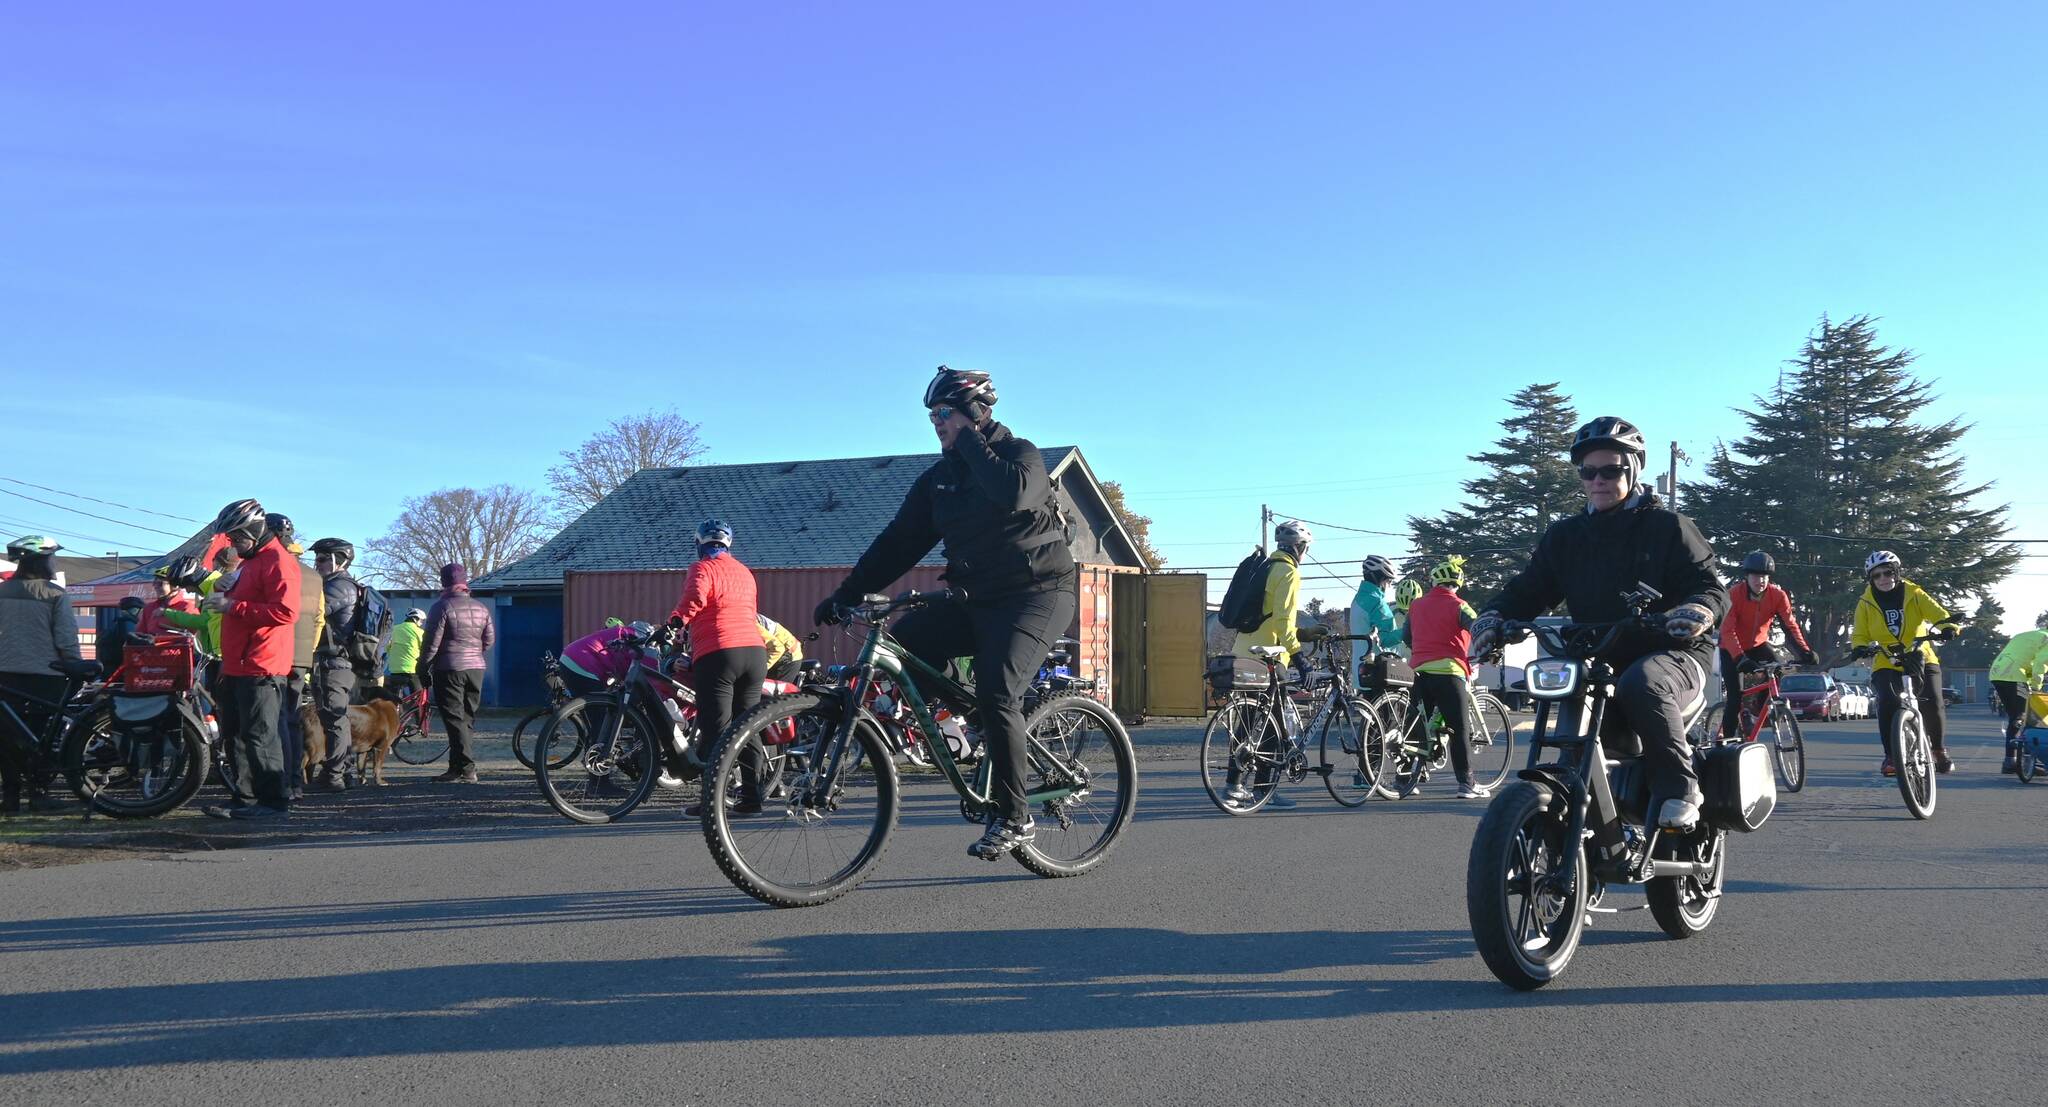 Sequim Gazette photo by Michael Dashiell / A record 66 riders turned out on Nov. 19 for the 2022 Cranksgiving event to benefit the Sequim Food Bank.